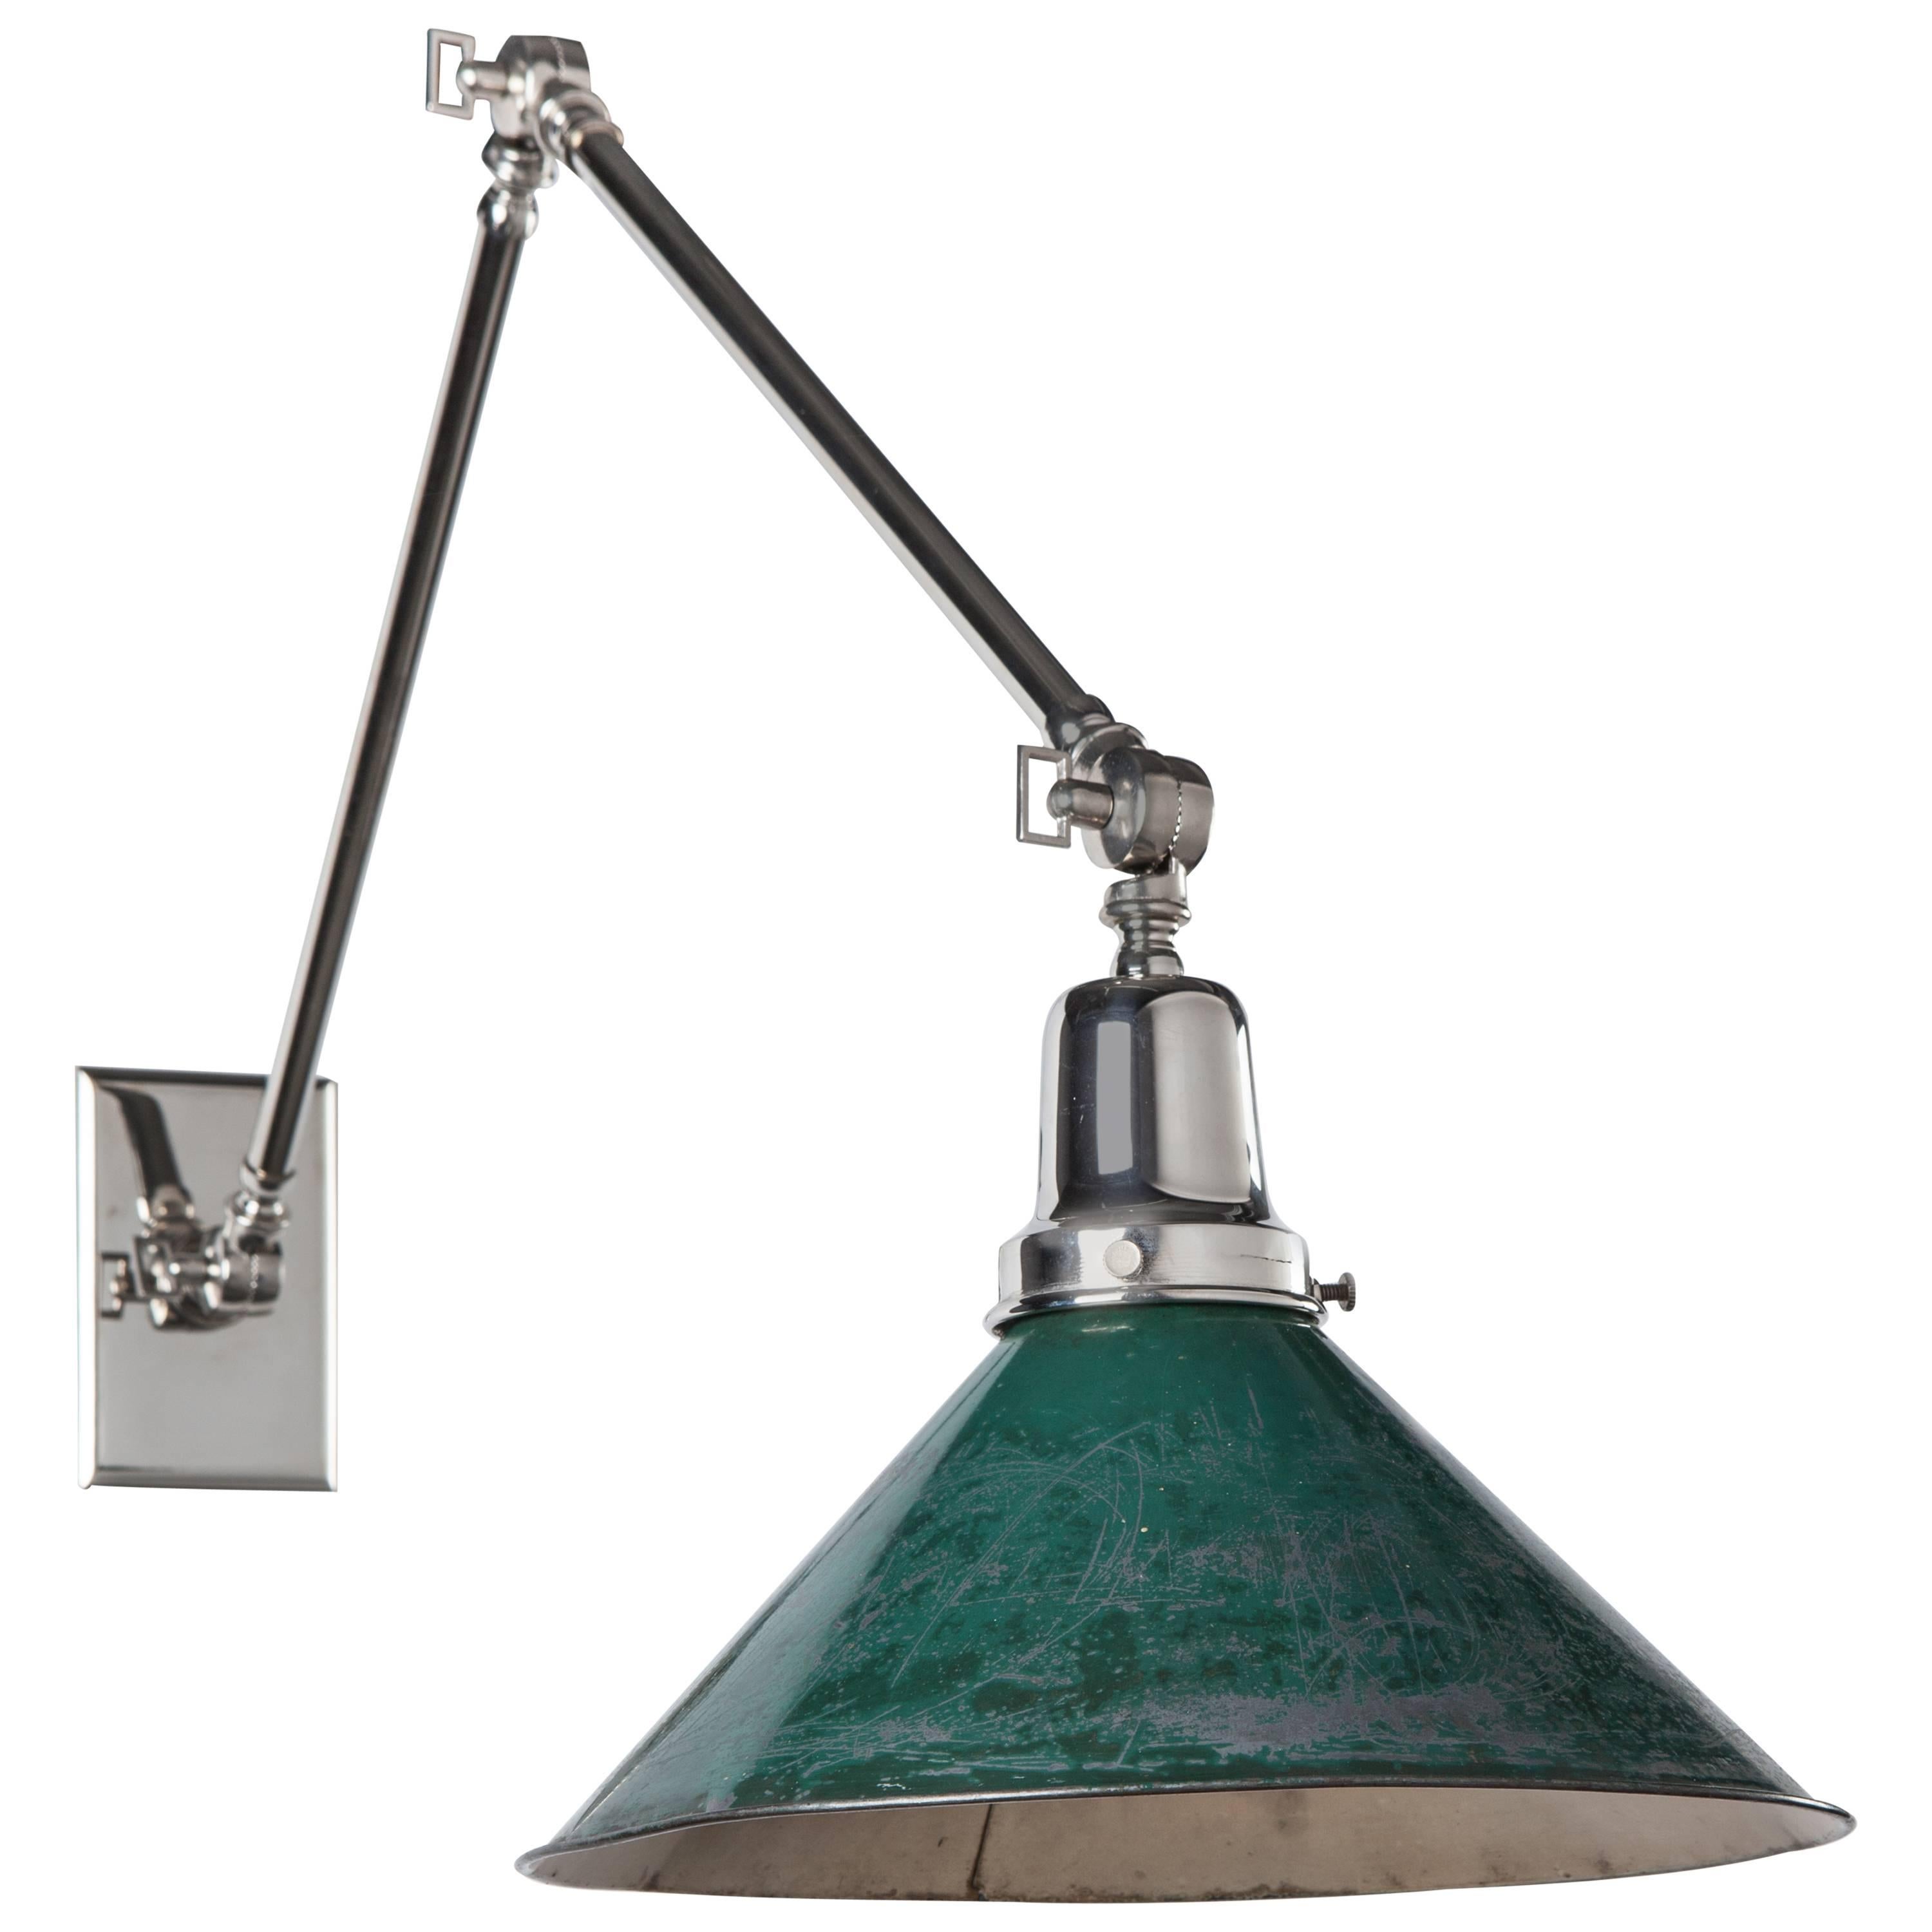 Articulated Sconce with Antique Industrial Green Shade, Circa 1910